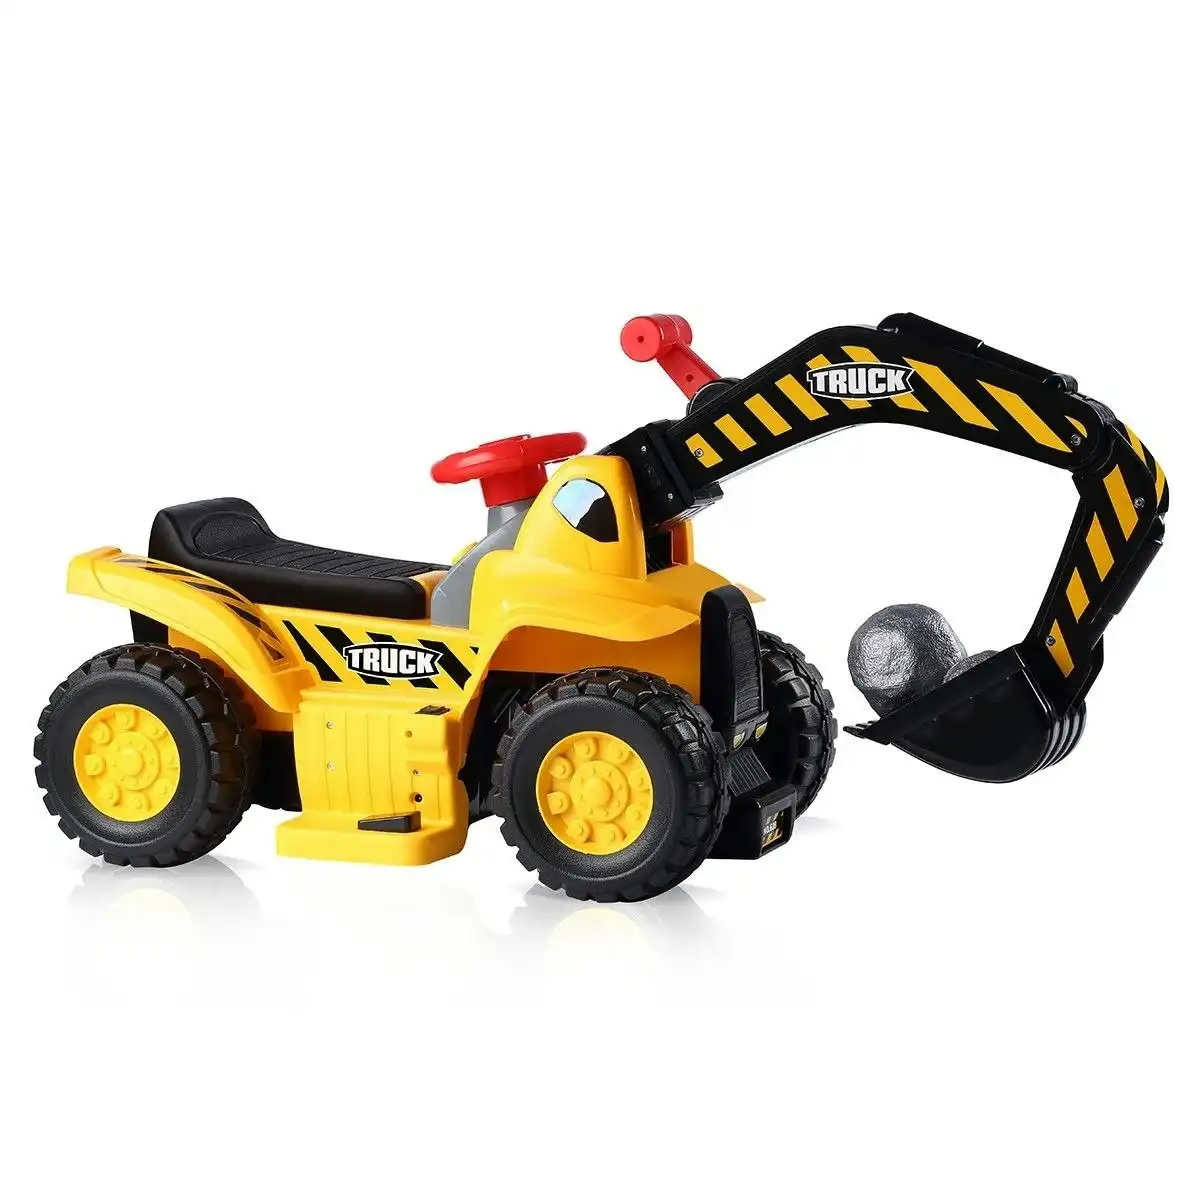 Ausway Kids Ride on Digger Electric Excavator Bulldozer Loader Car with Safety Helmet